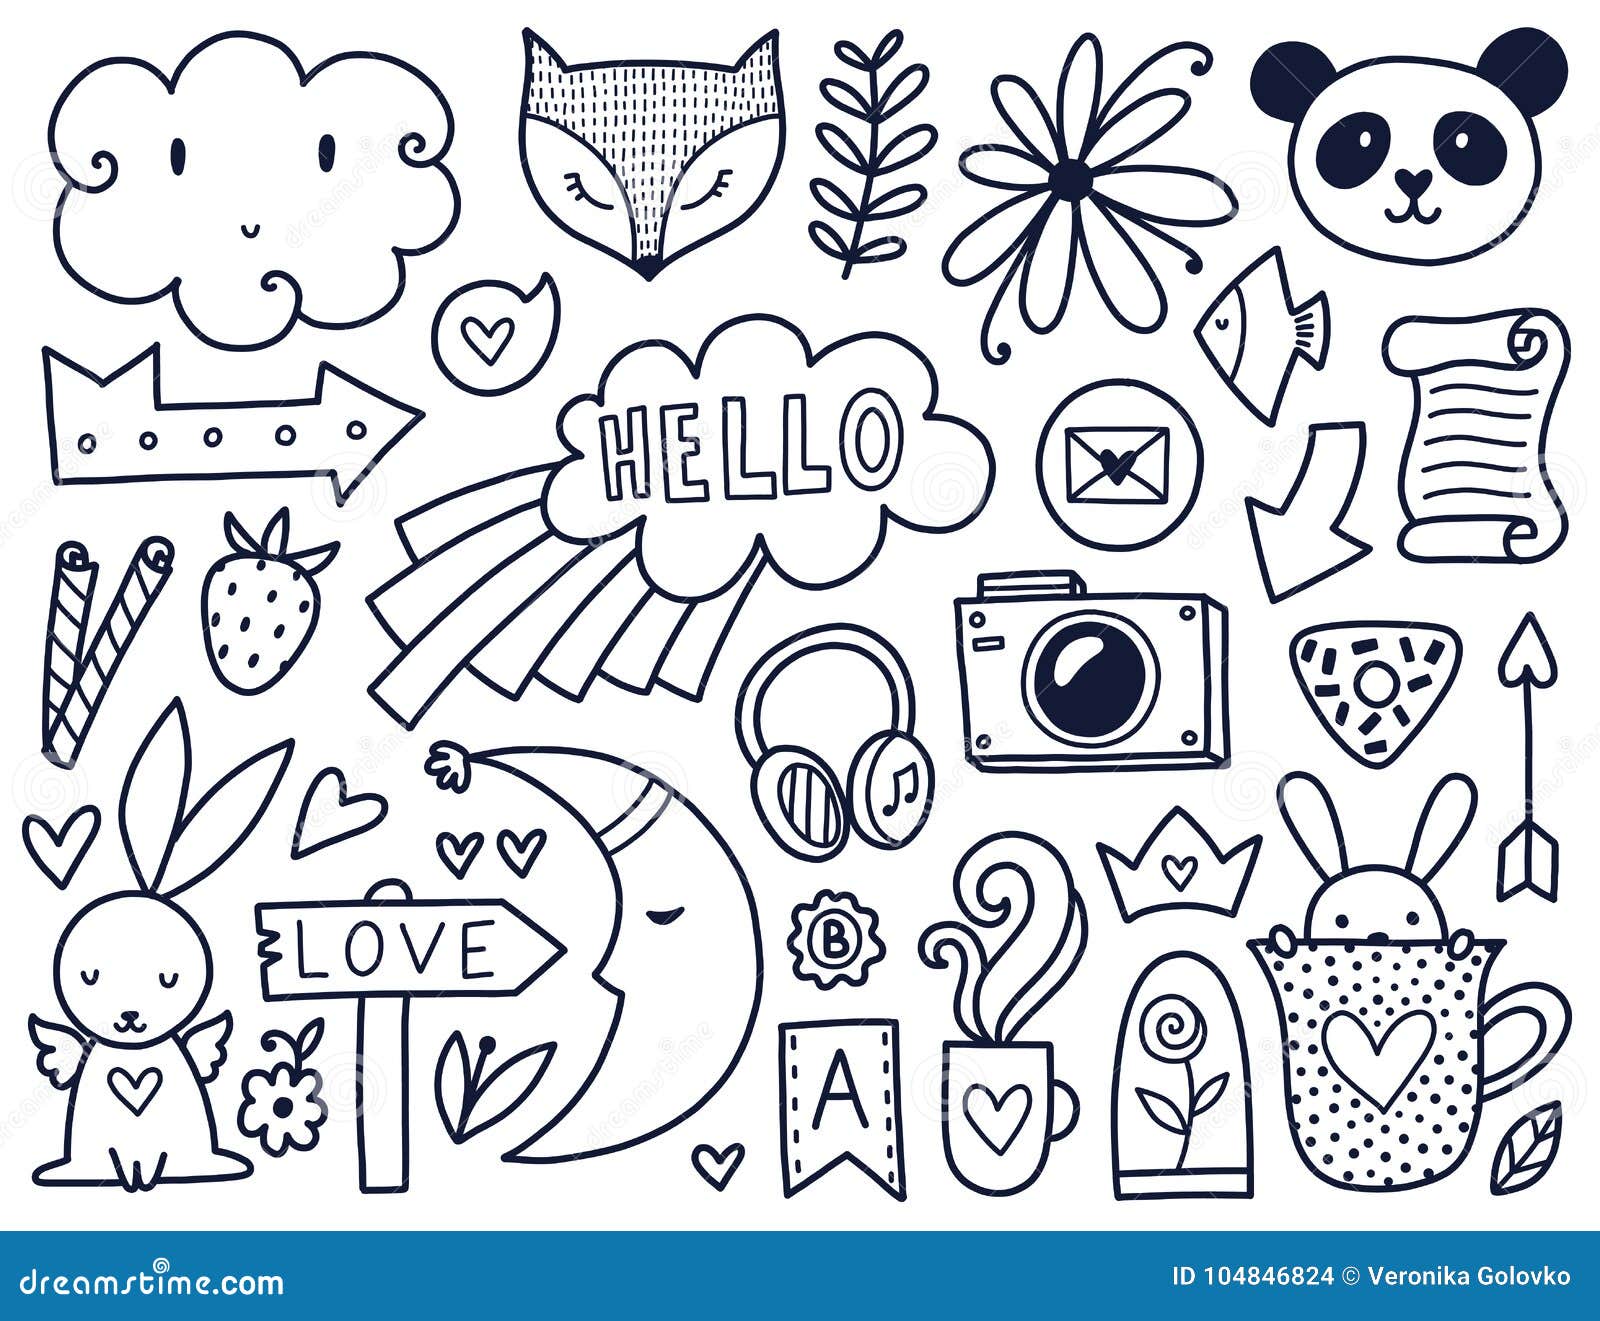 Vector black doodles stock vector. Illustration of icon - 104846824